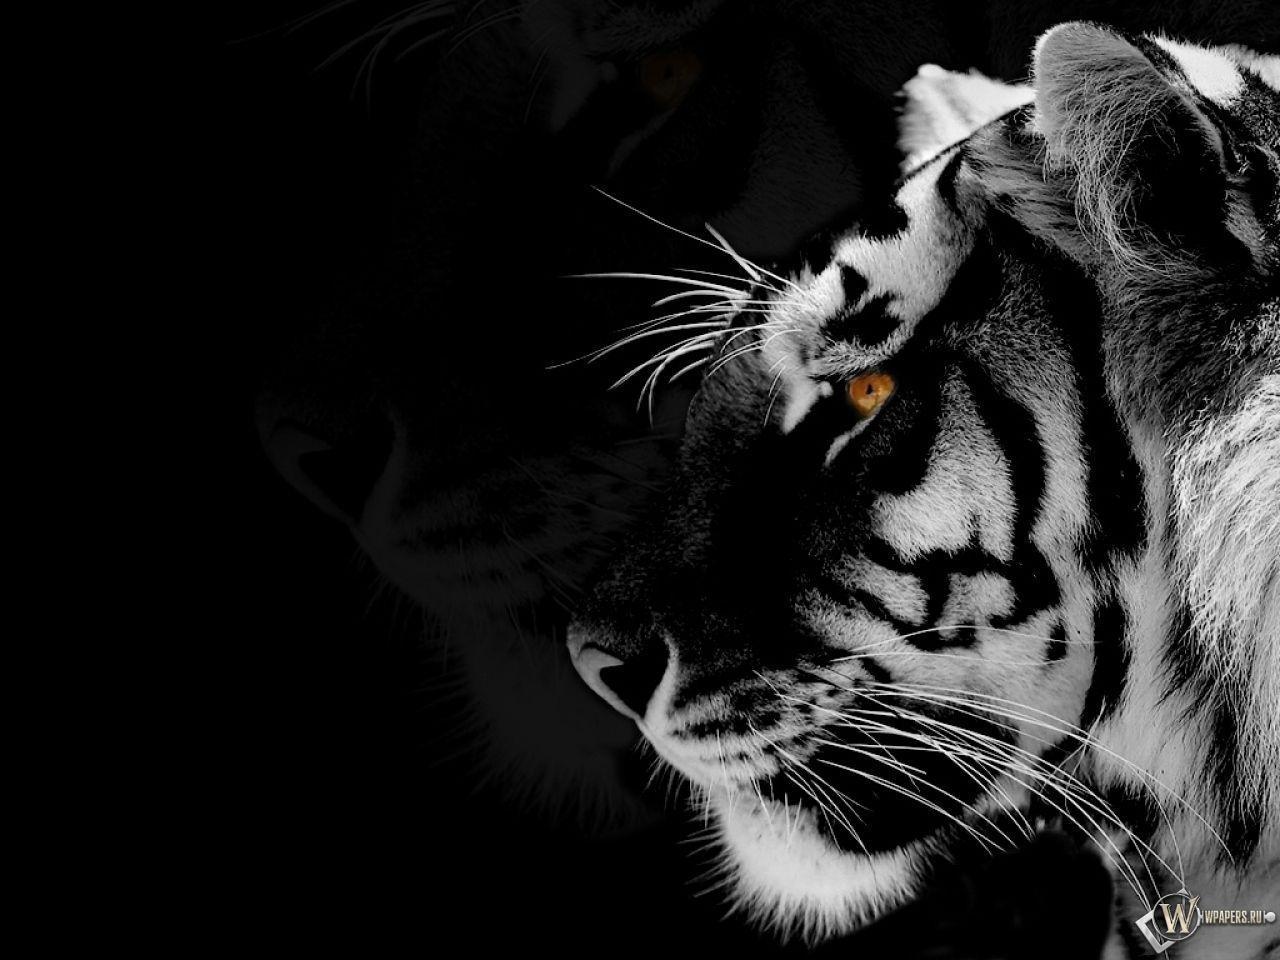 best image about Black & White HD. Black